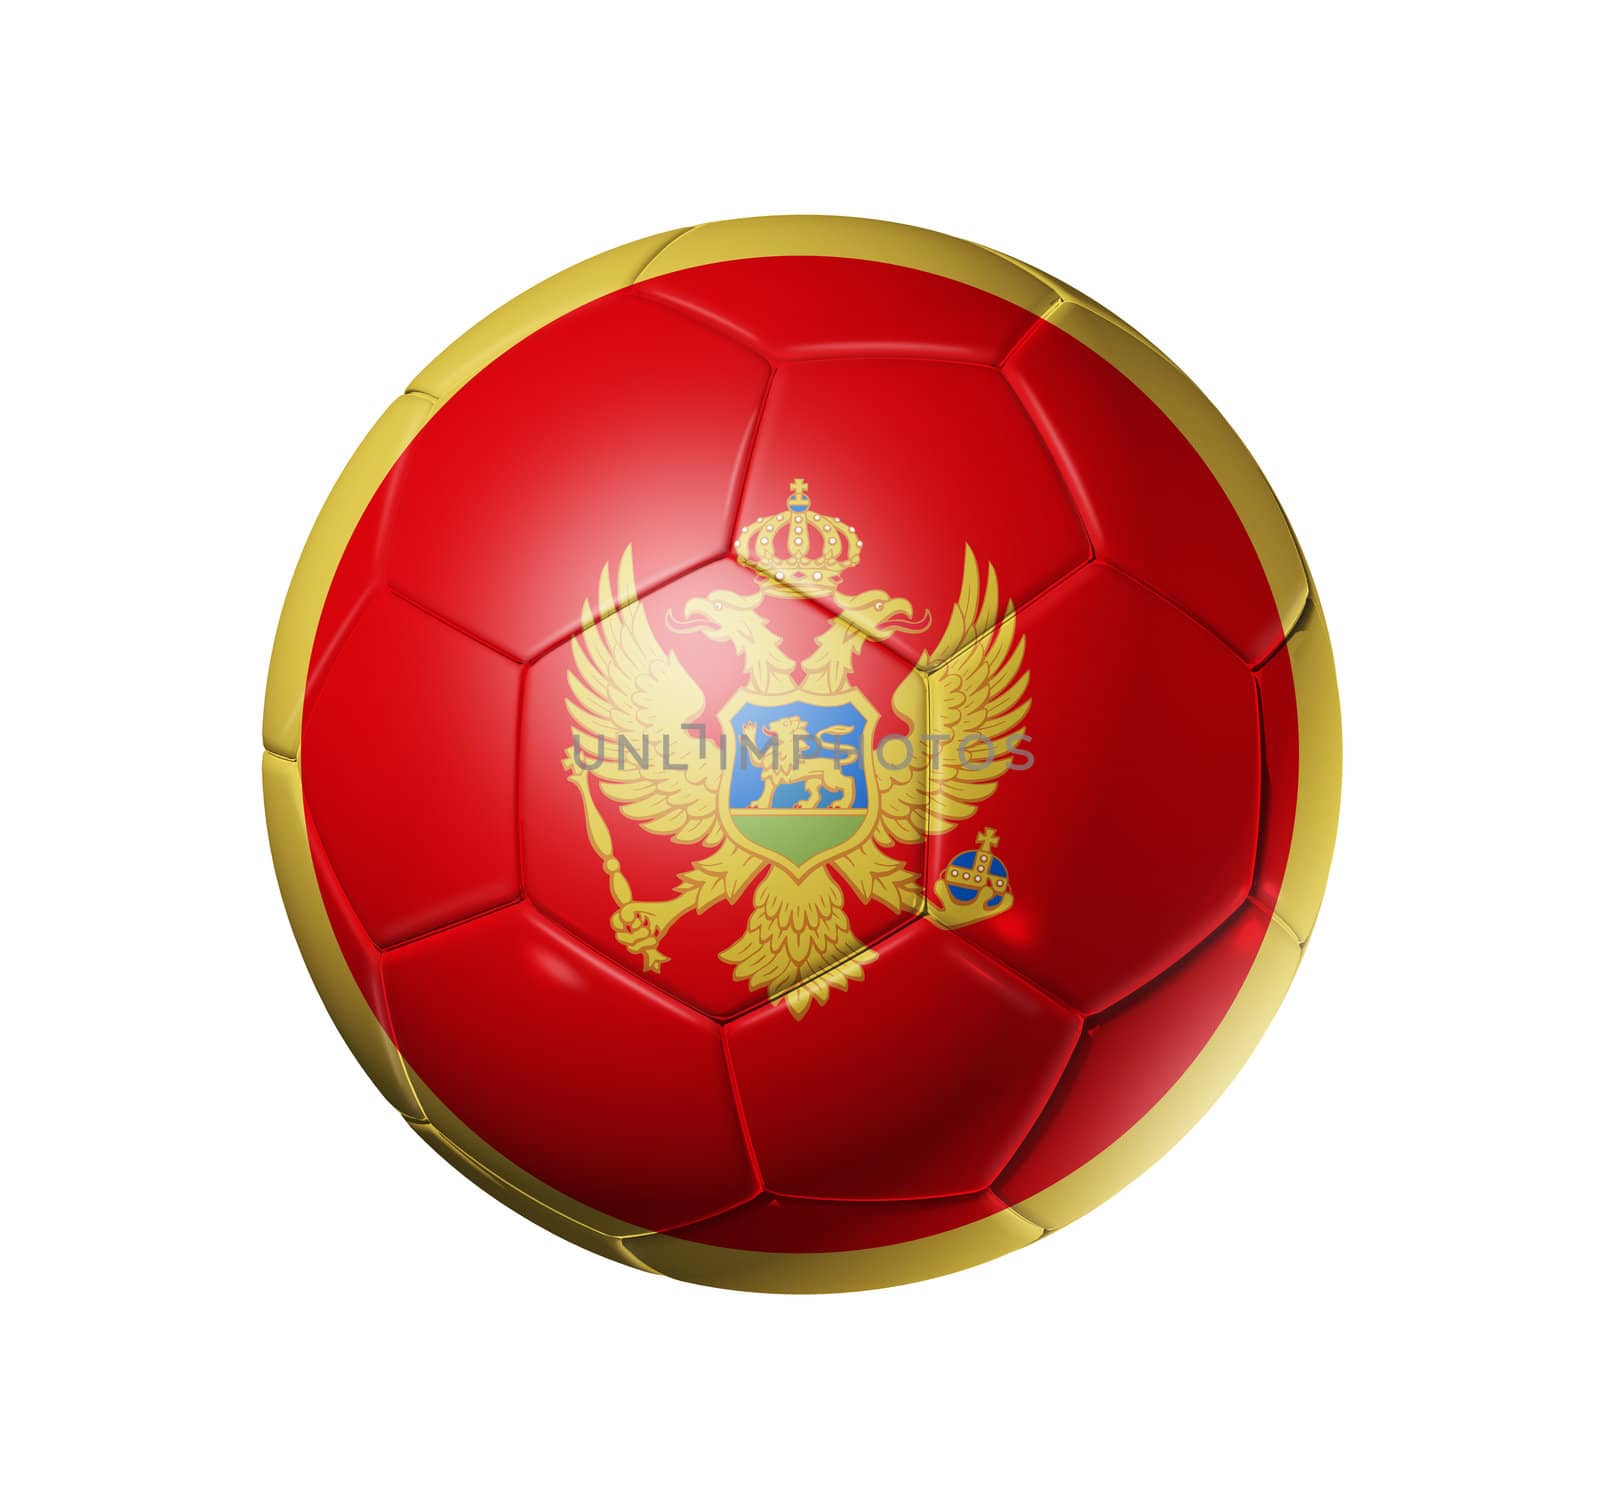 Soccer football ball with Montenegro flag by daboost